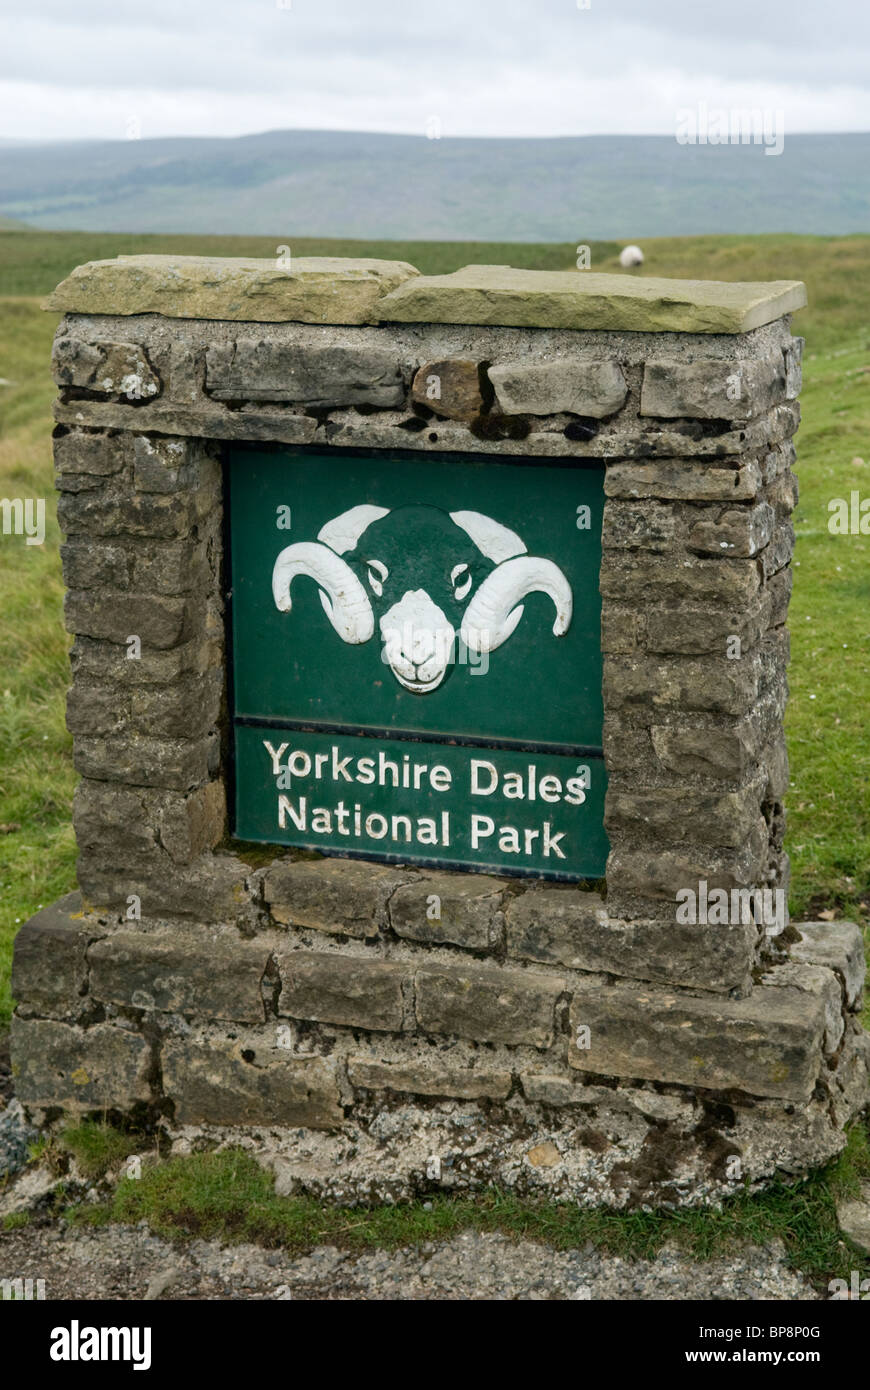 Yorkshire Dales National Park, Arkengarthdale, North Yorkshire, England. Stock Photo